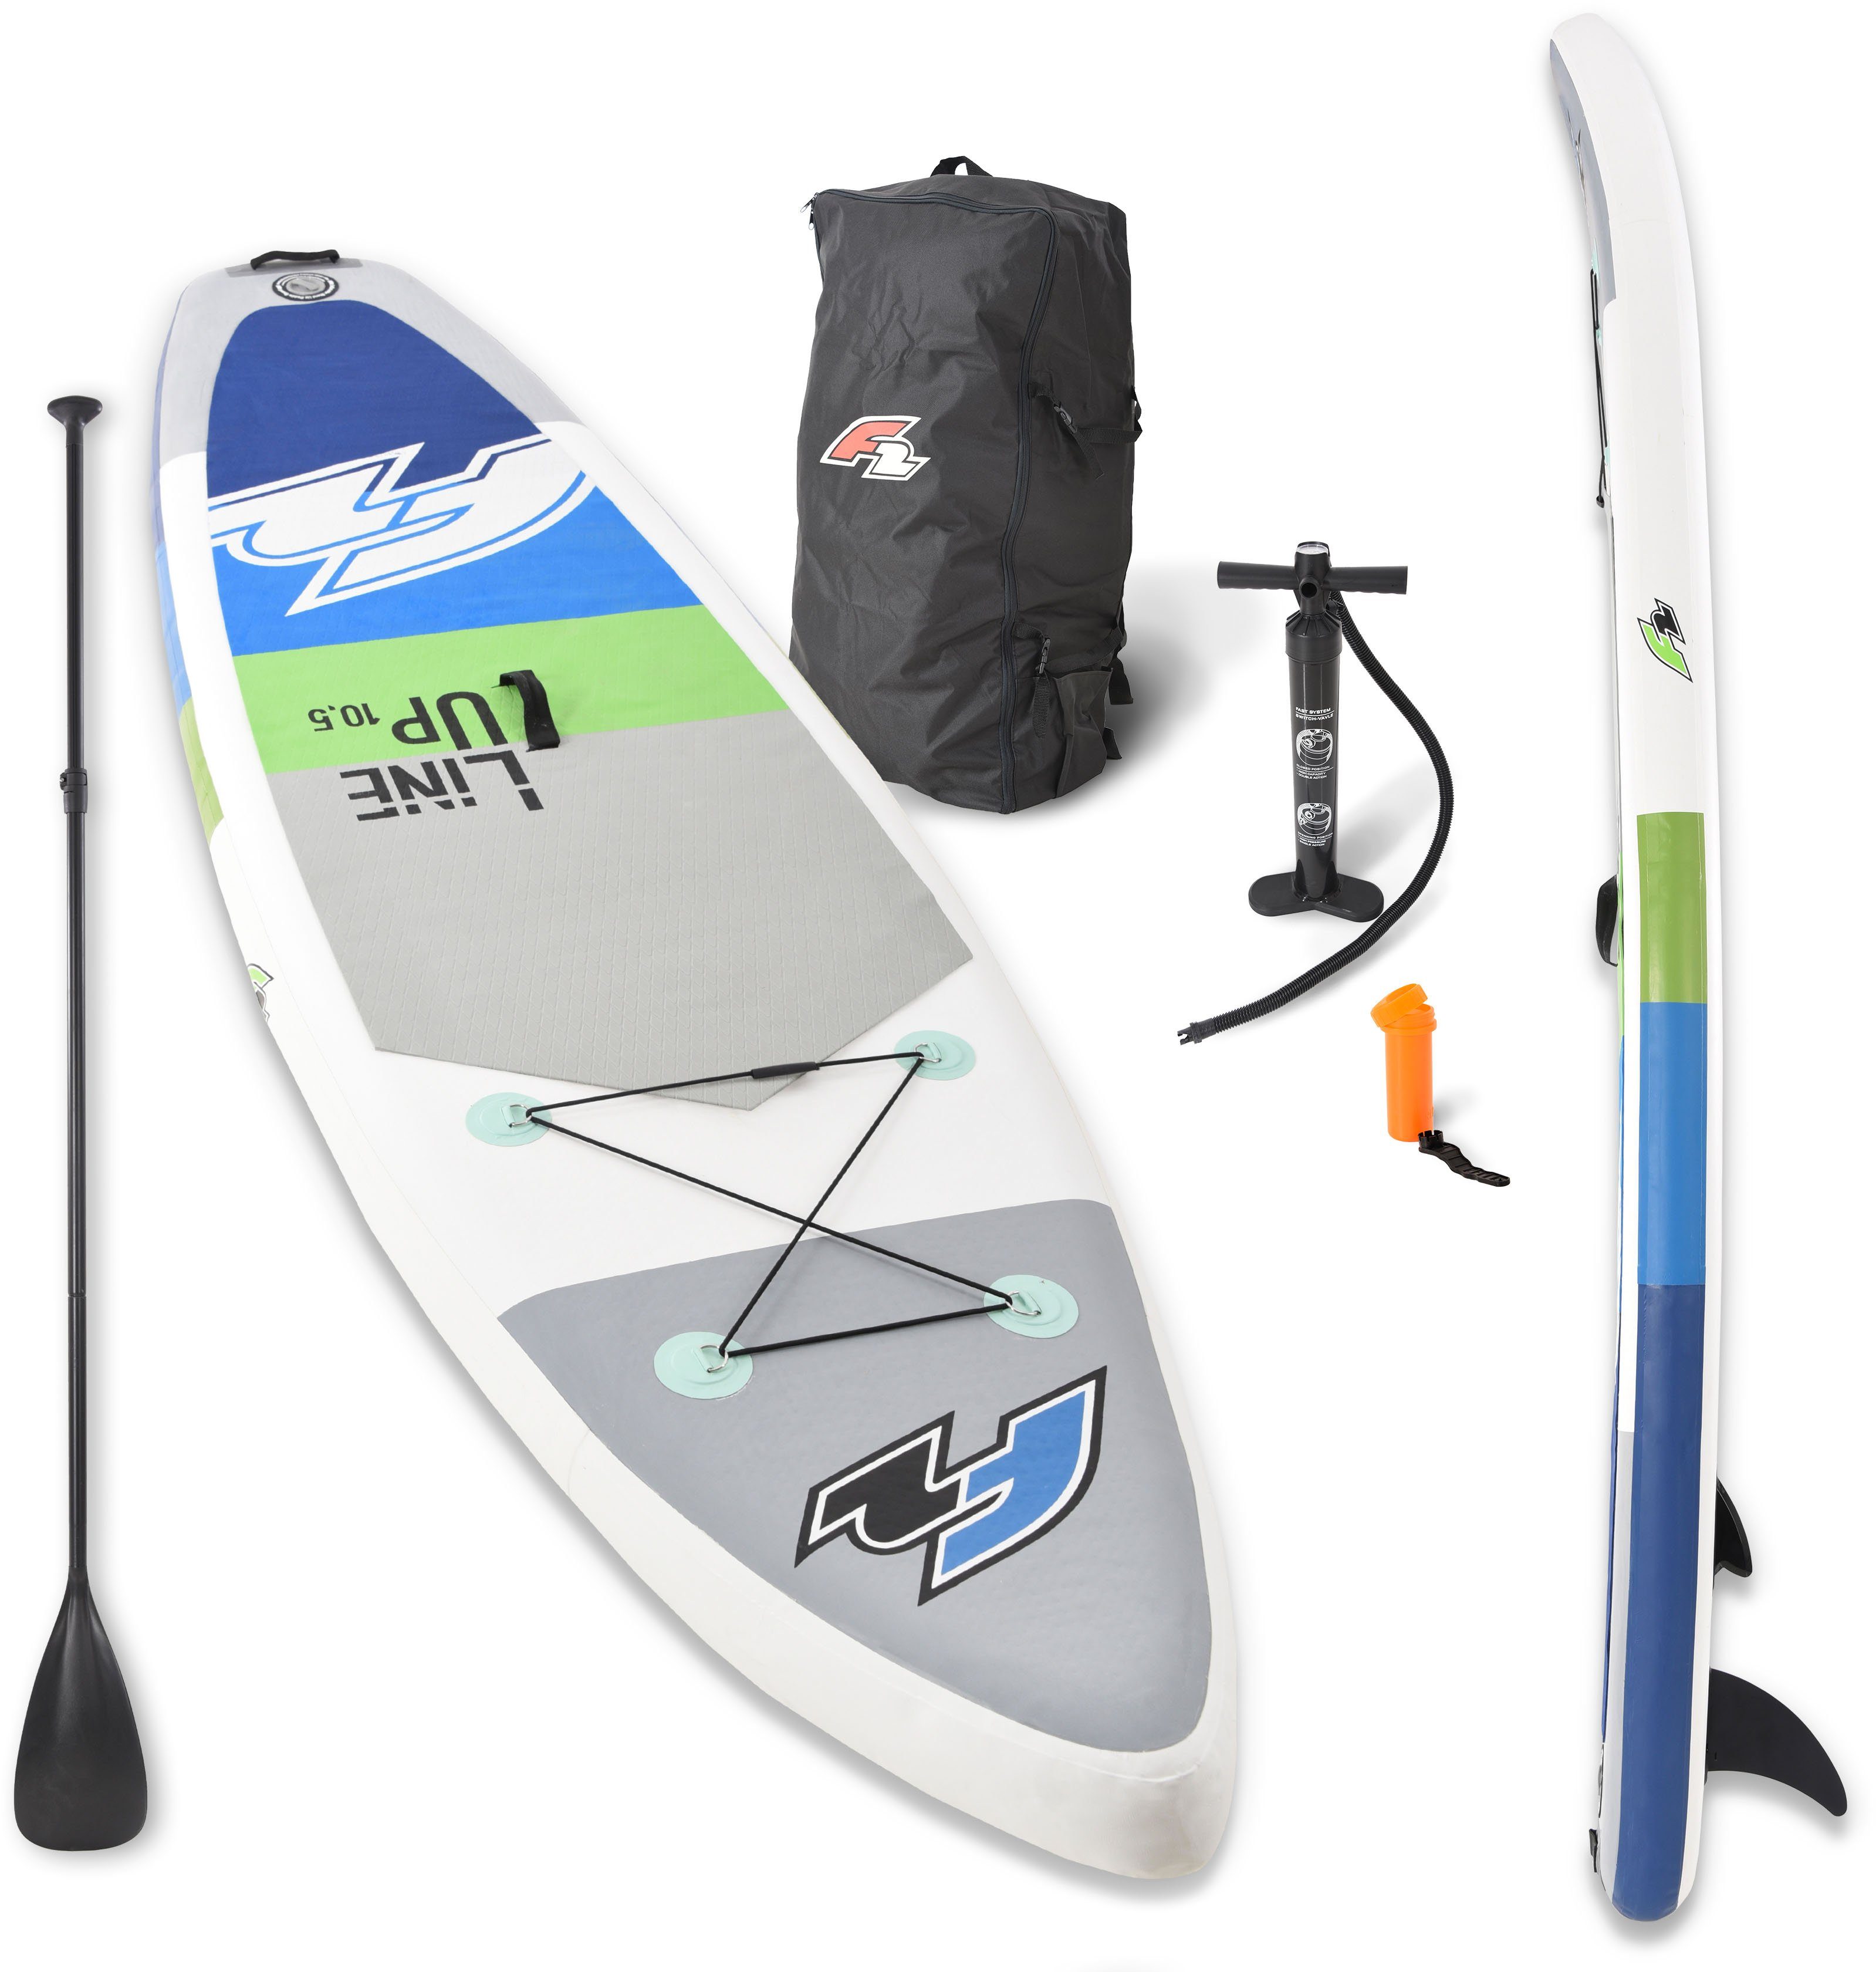 F2 Inflatable SUP-Board F2 Line Up SMO blue mit Carbonpaddel, (Set, 5 tlg) | SUP-Boards